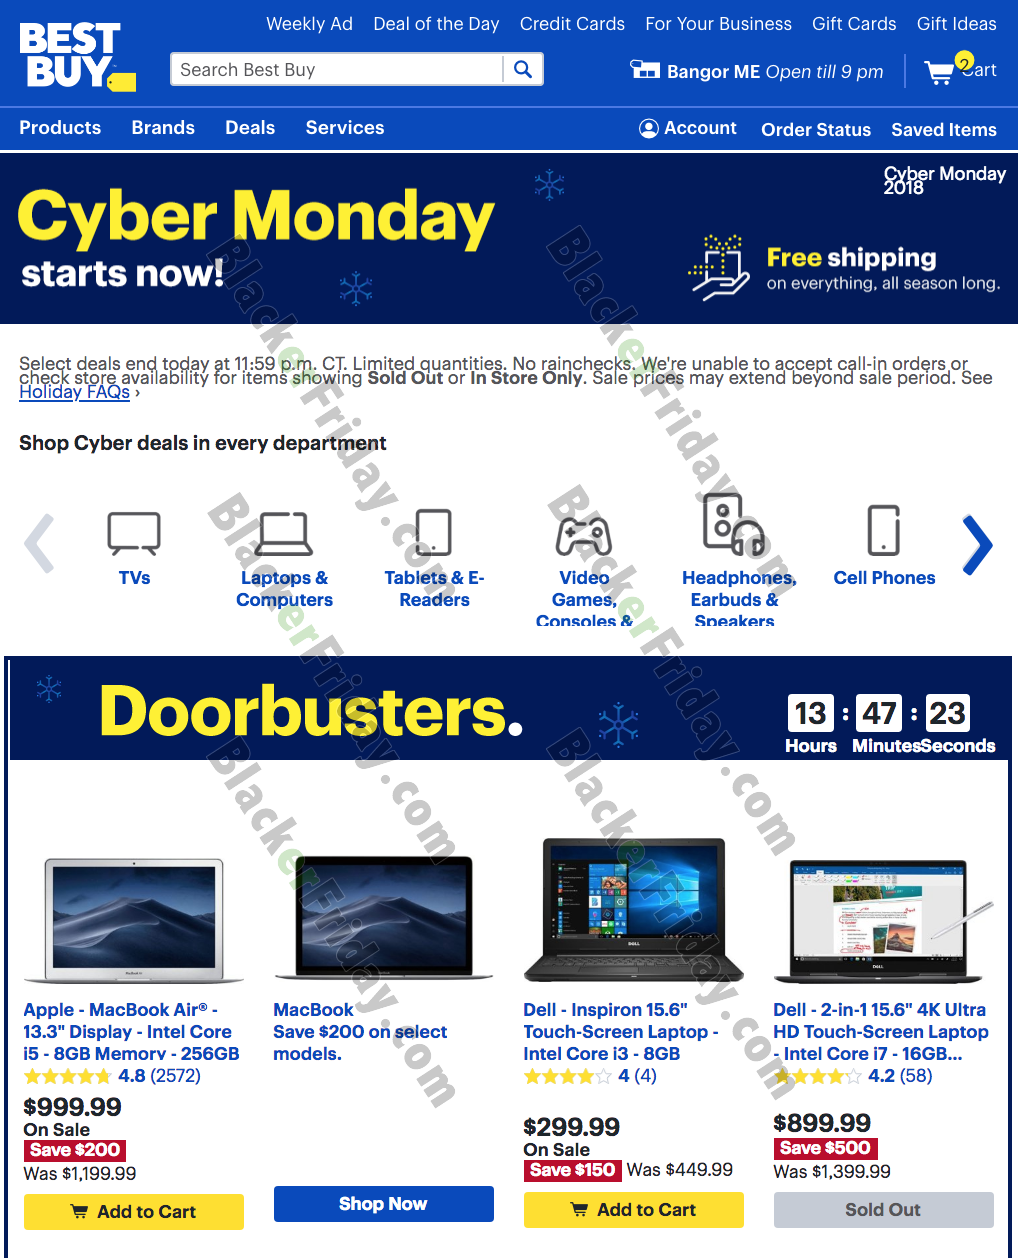 Best Buy Cyber Monday 2020 Sale - What to Expect - Blacker Friday